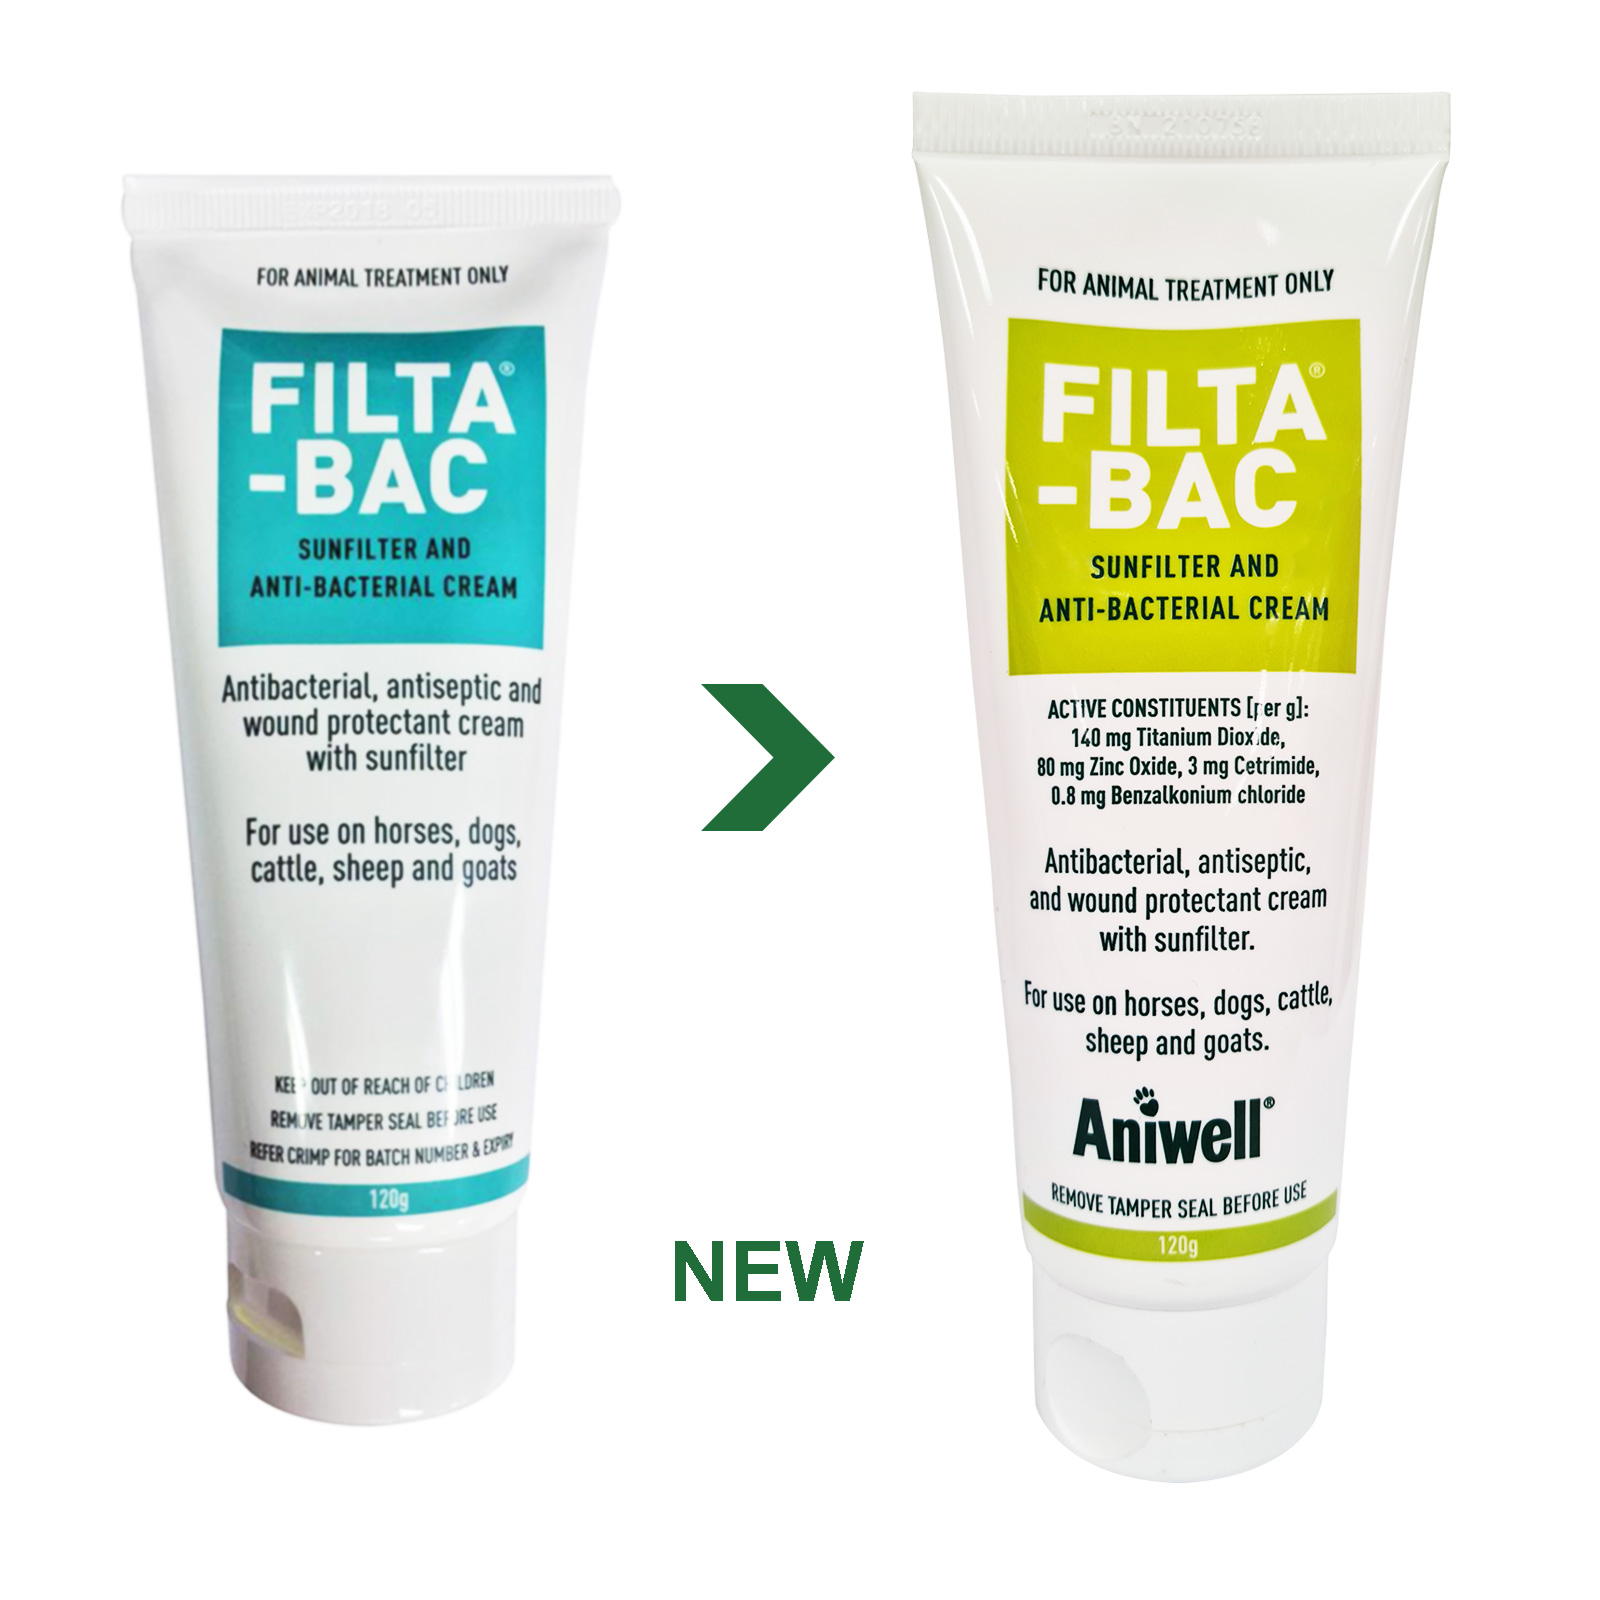 Filta Bac Sunfilter And Anti Bacterial Cream 120gm - $15.95